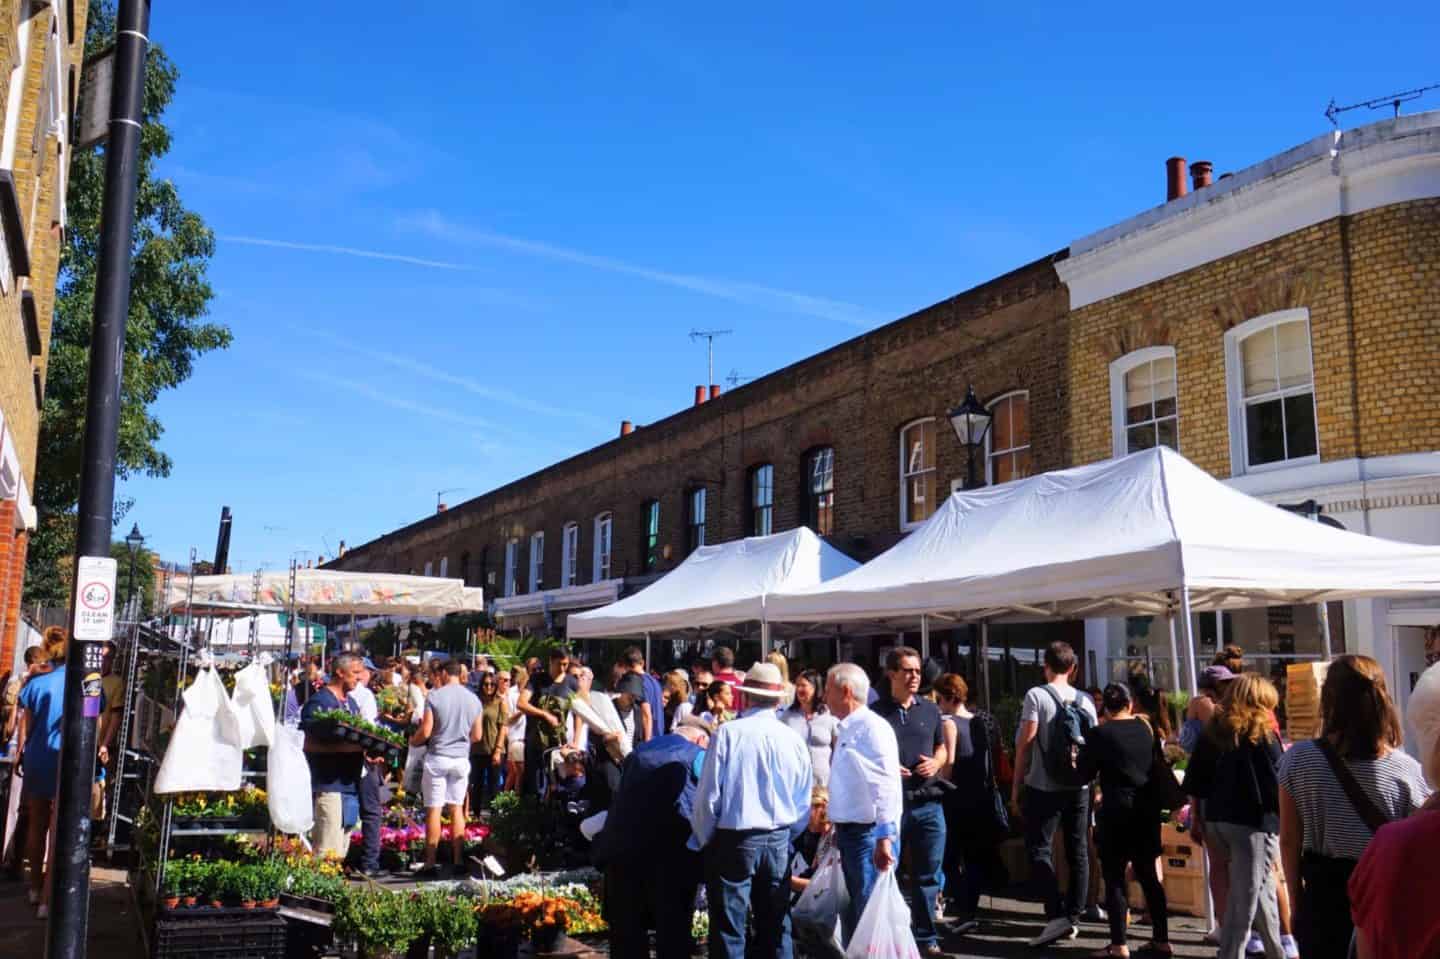 Places to go in Shoreditch, Columbia Road Flower Market